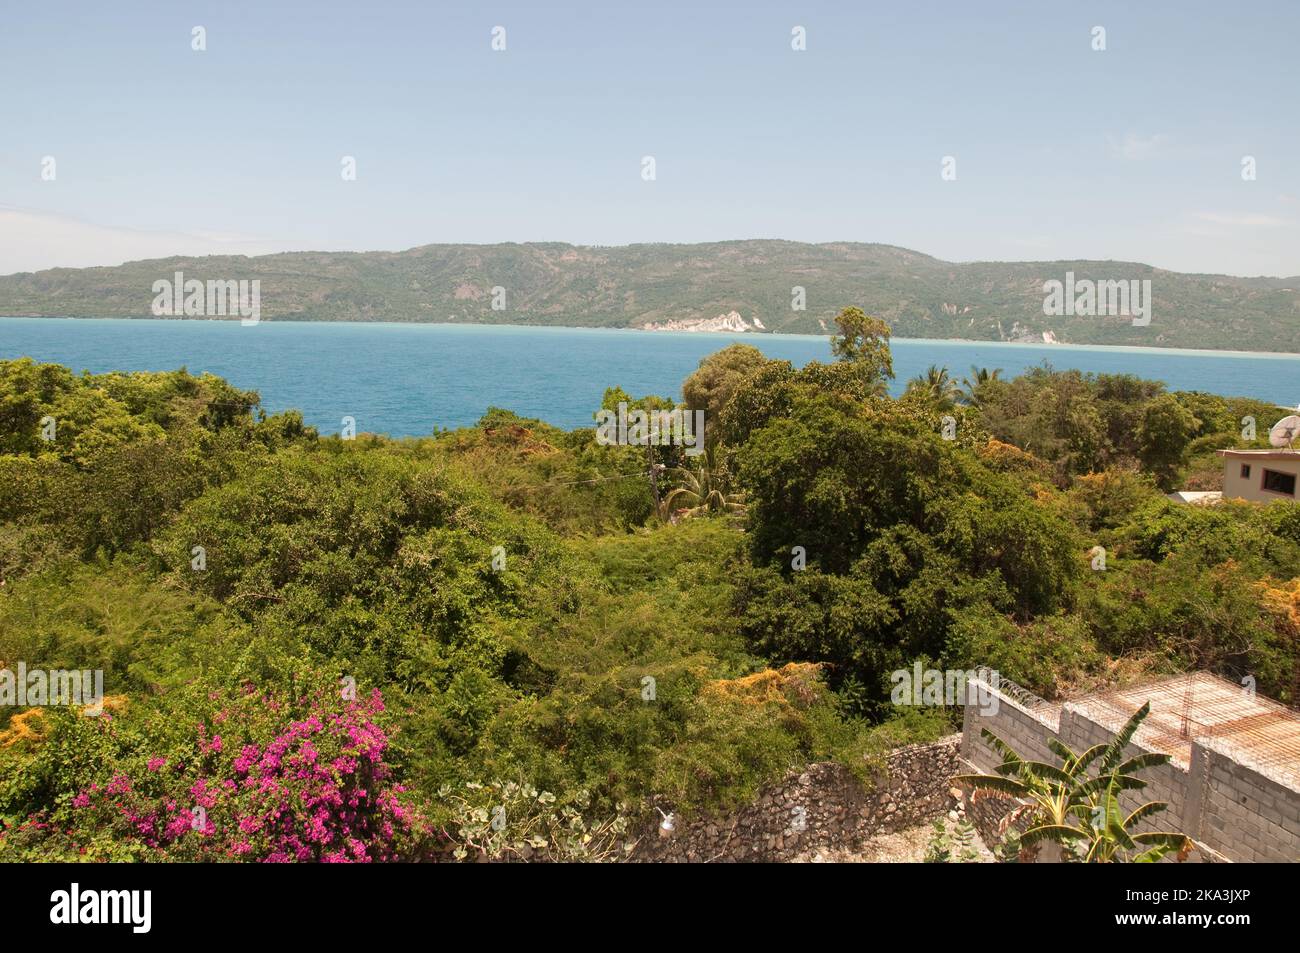 View to Bay of Jacmel, Haiti.  Jacmel is a large town on the south coast of Haiti, and was one of the richest towns in the Caribbean. Stock Photo